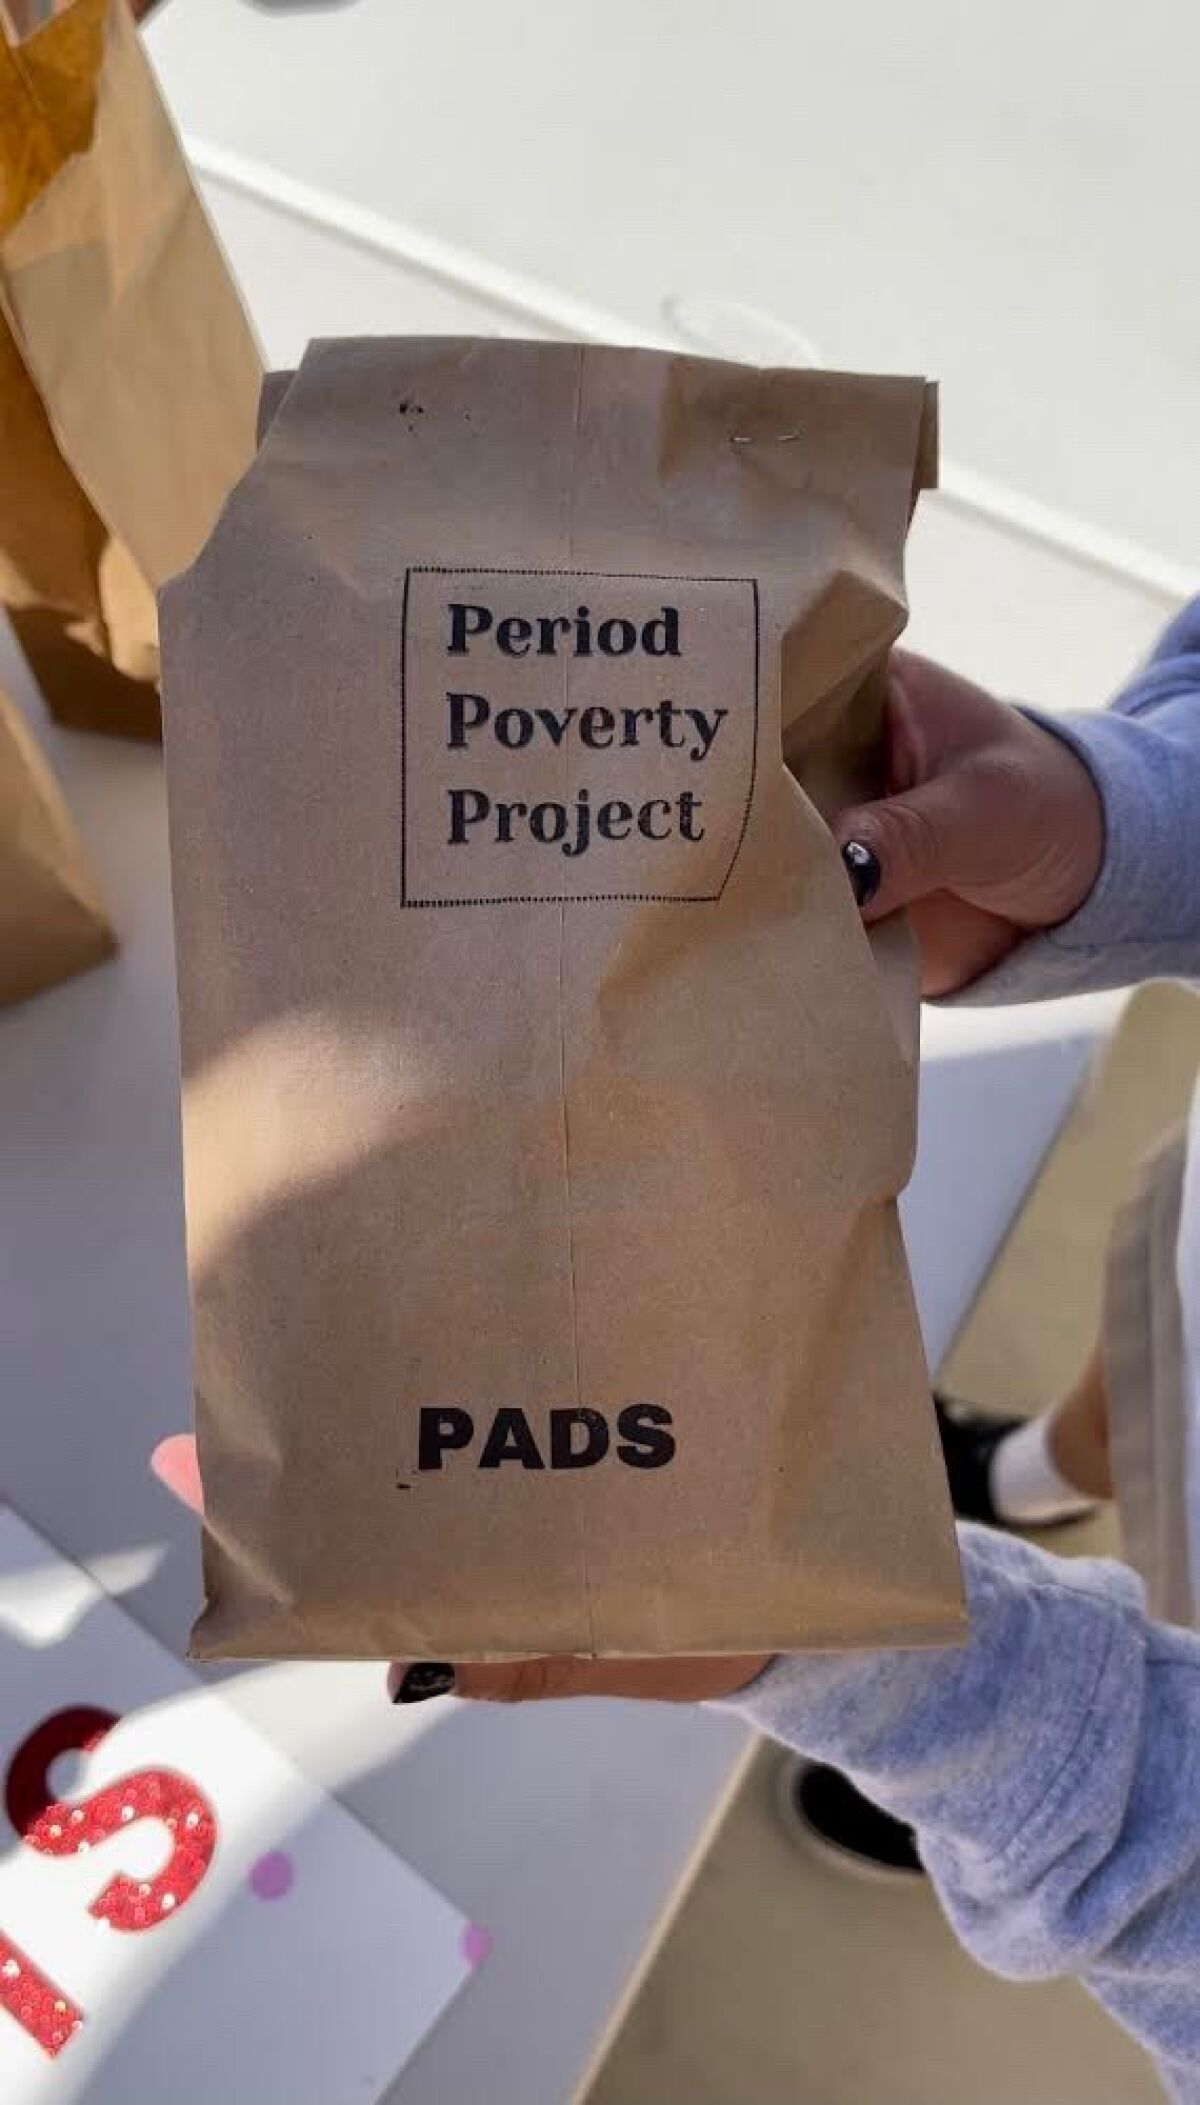 One of the Period Poverty Project's individual period packs.